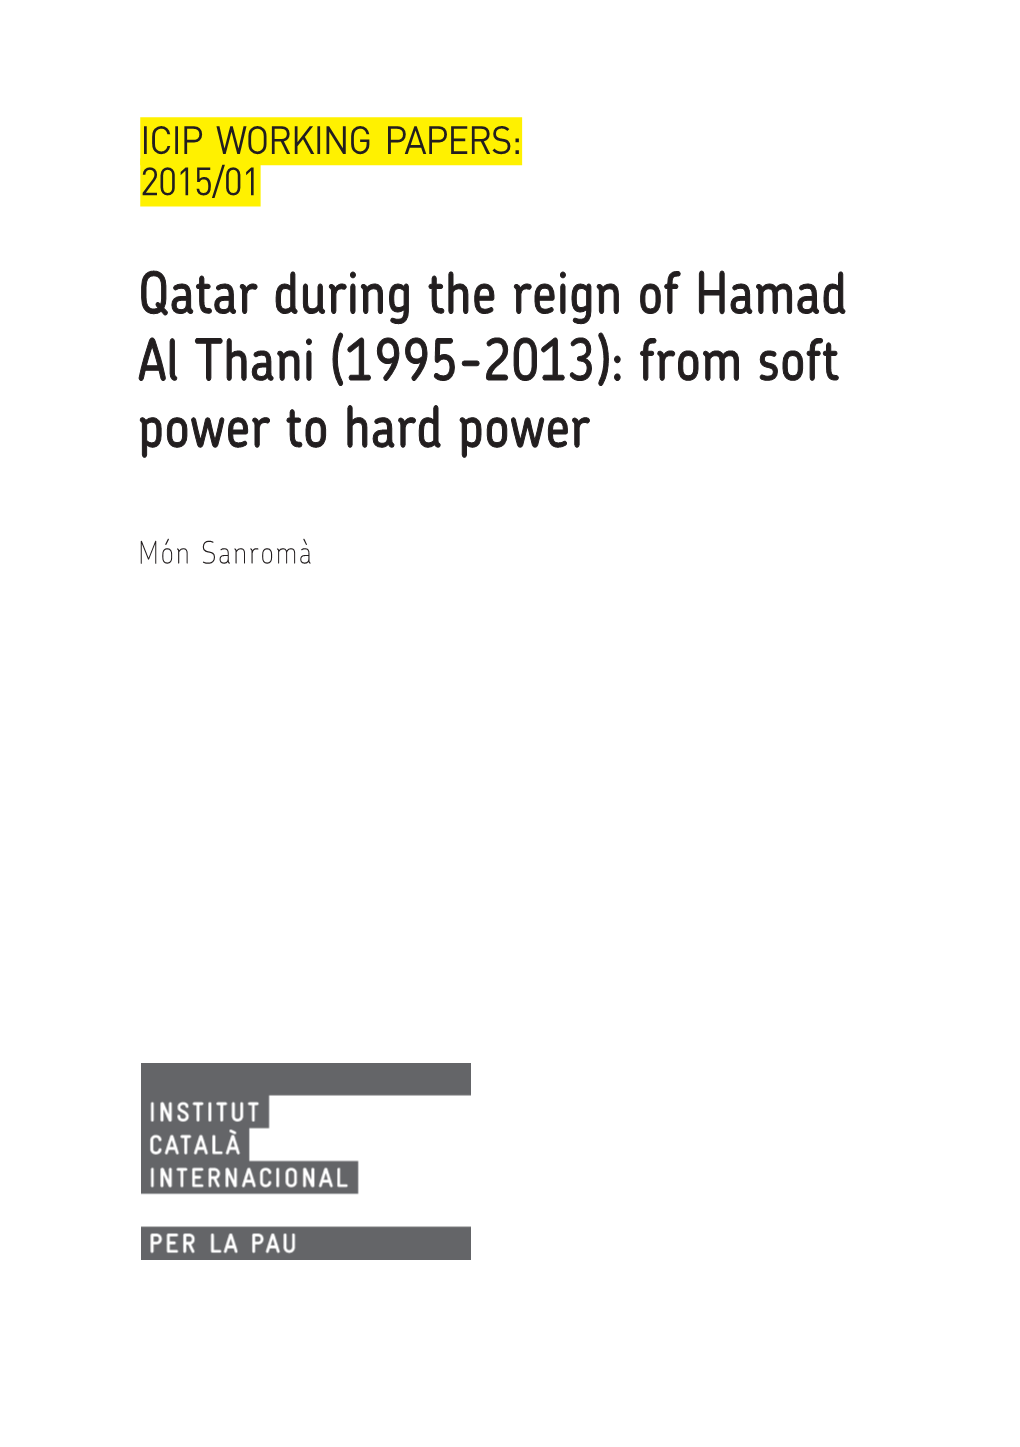 Qatar During the Reign of Hamad Al Thani (1995-2013): from Soft Power to Hard Power